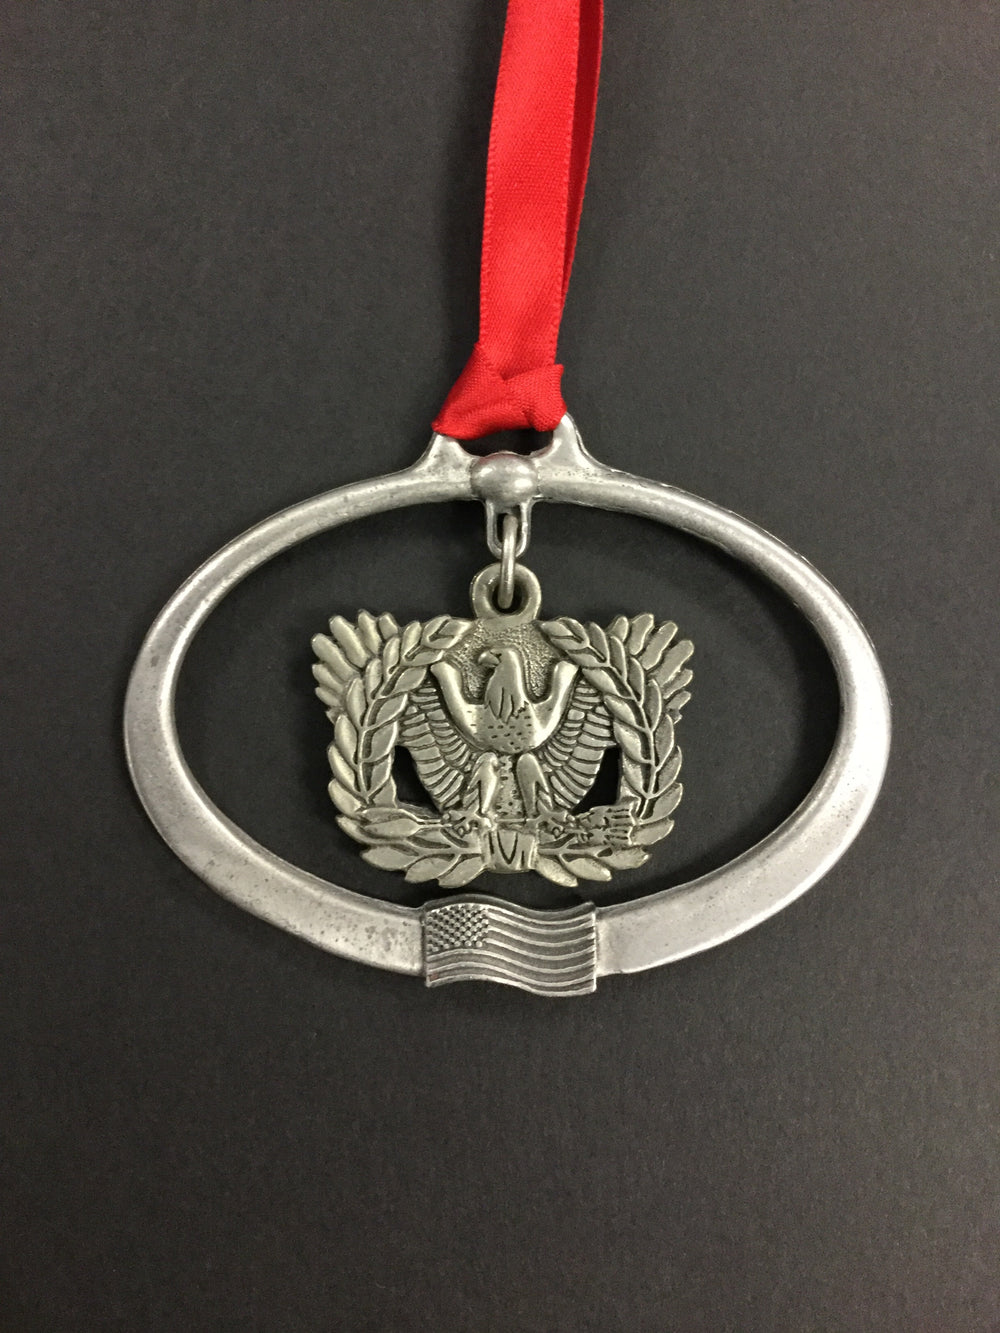 Warrant Officer Pewter Ornament